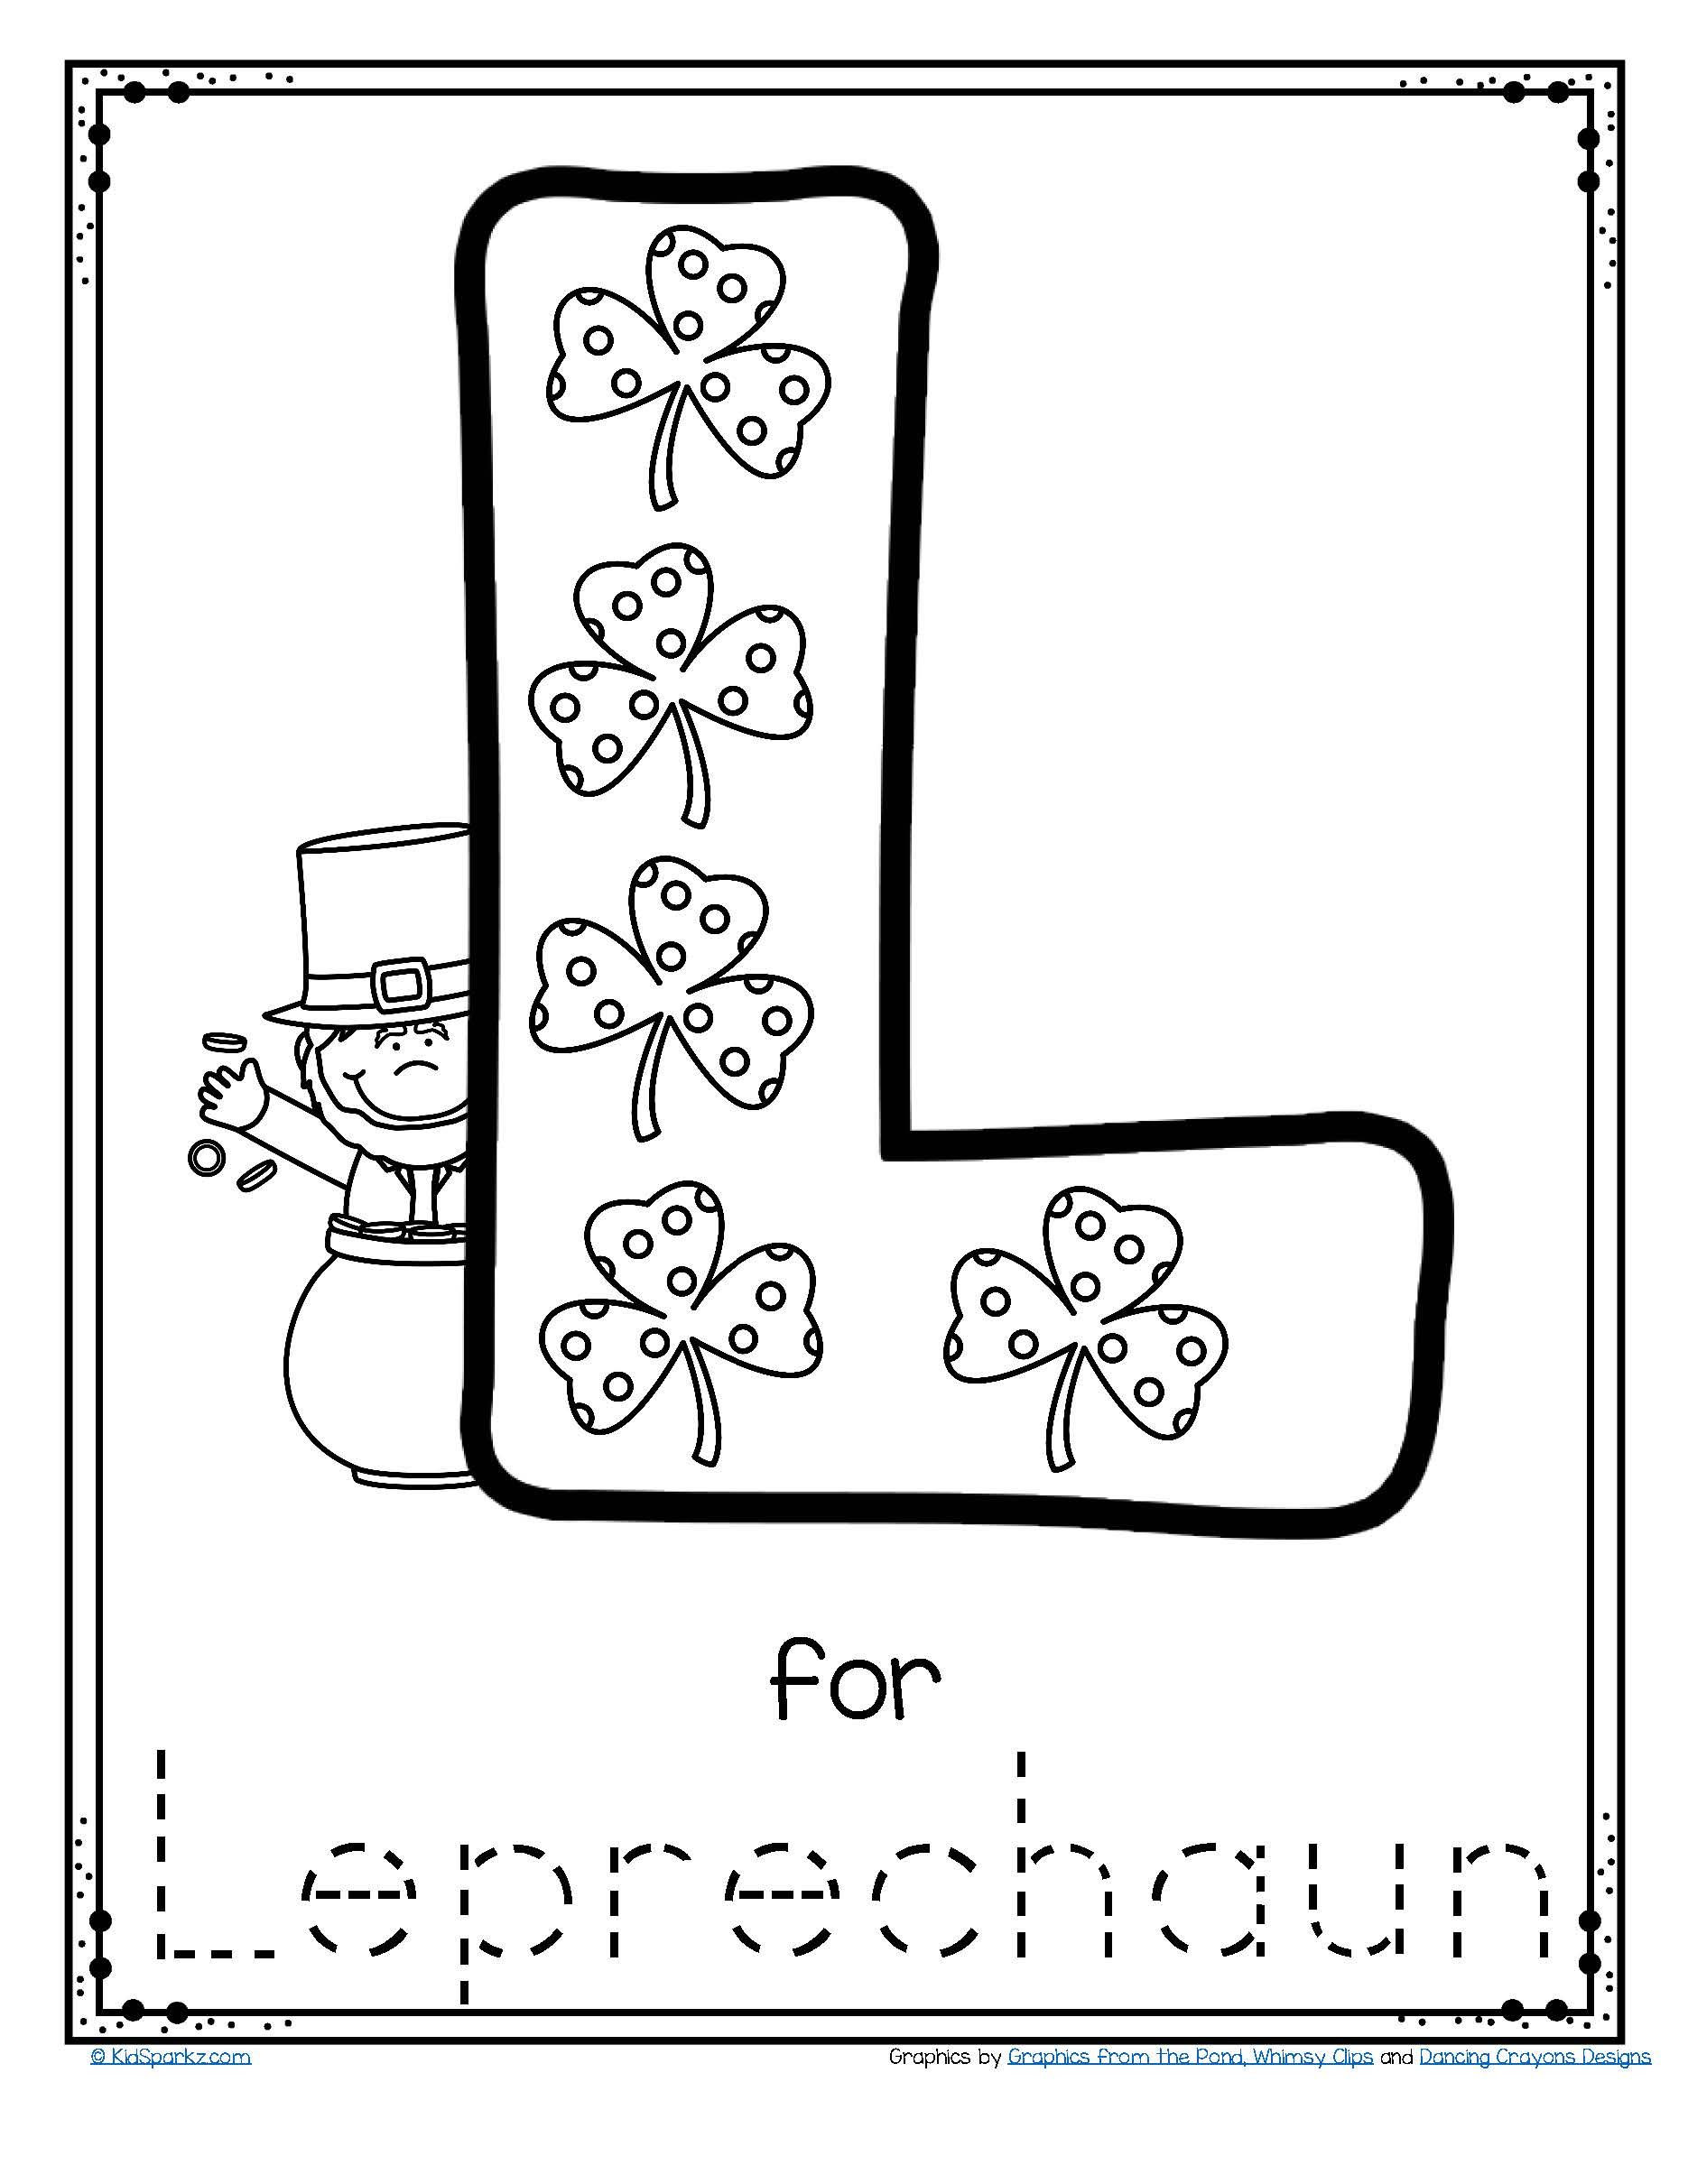 St Patrick's Day Activities For Pre K
 FREE L for leprechaun alphabet trace and color printable